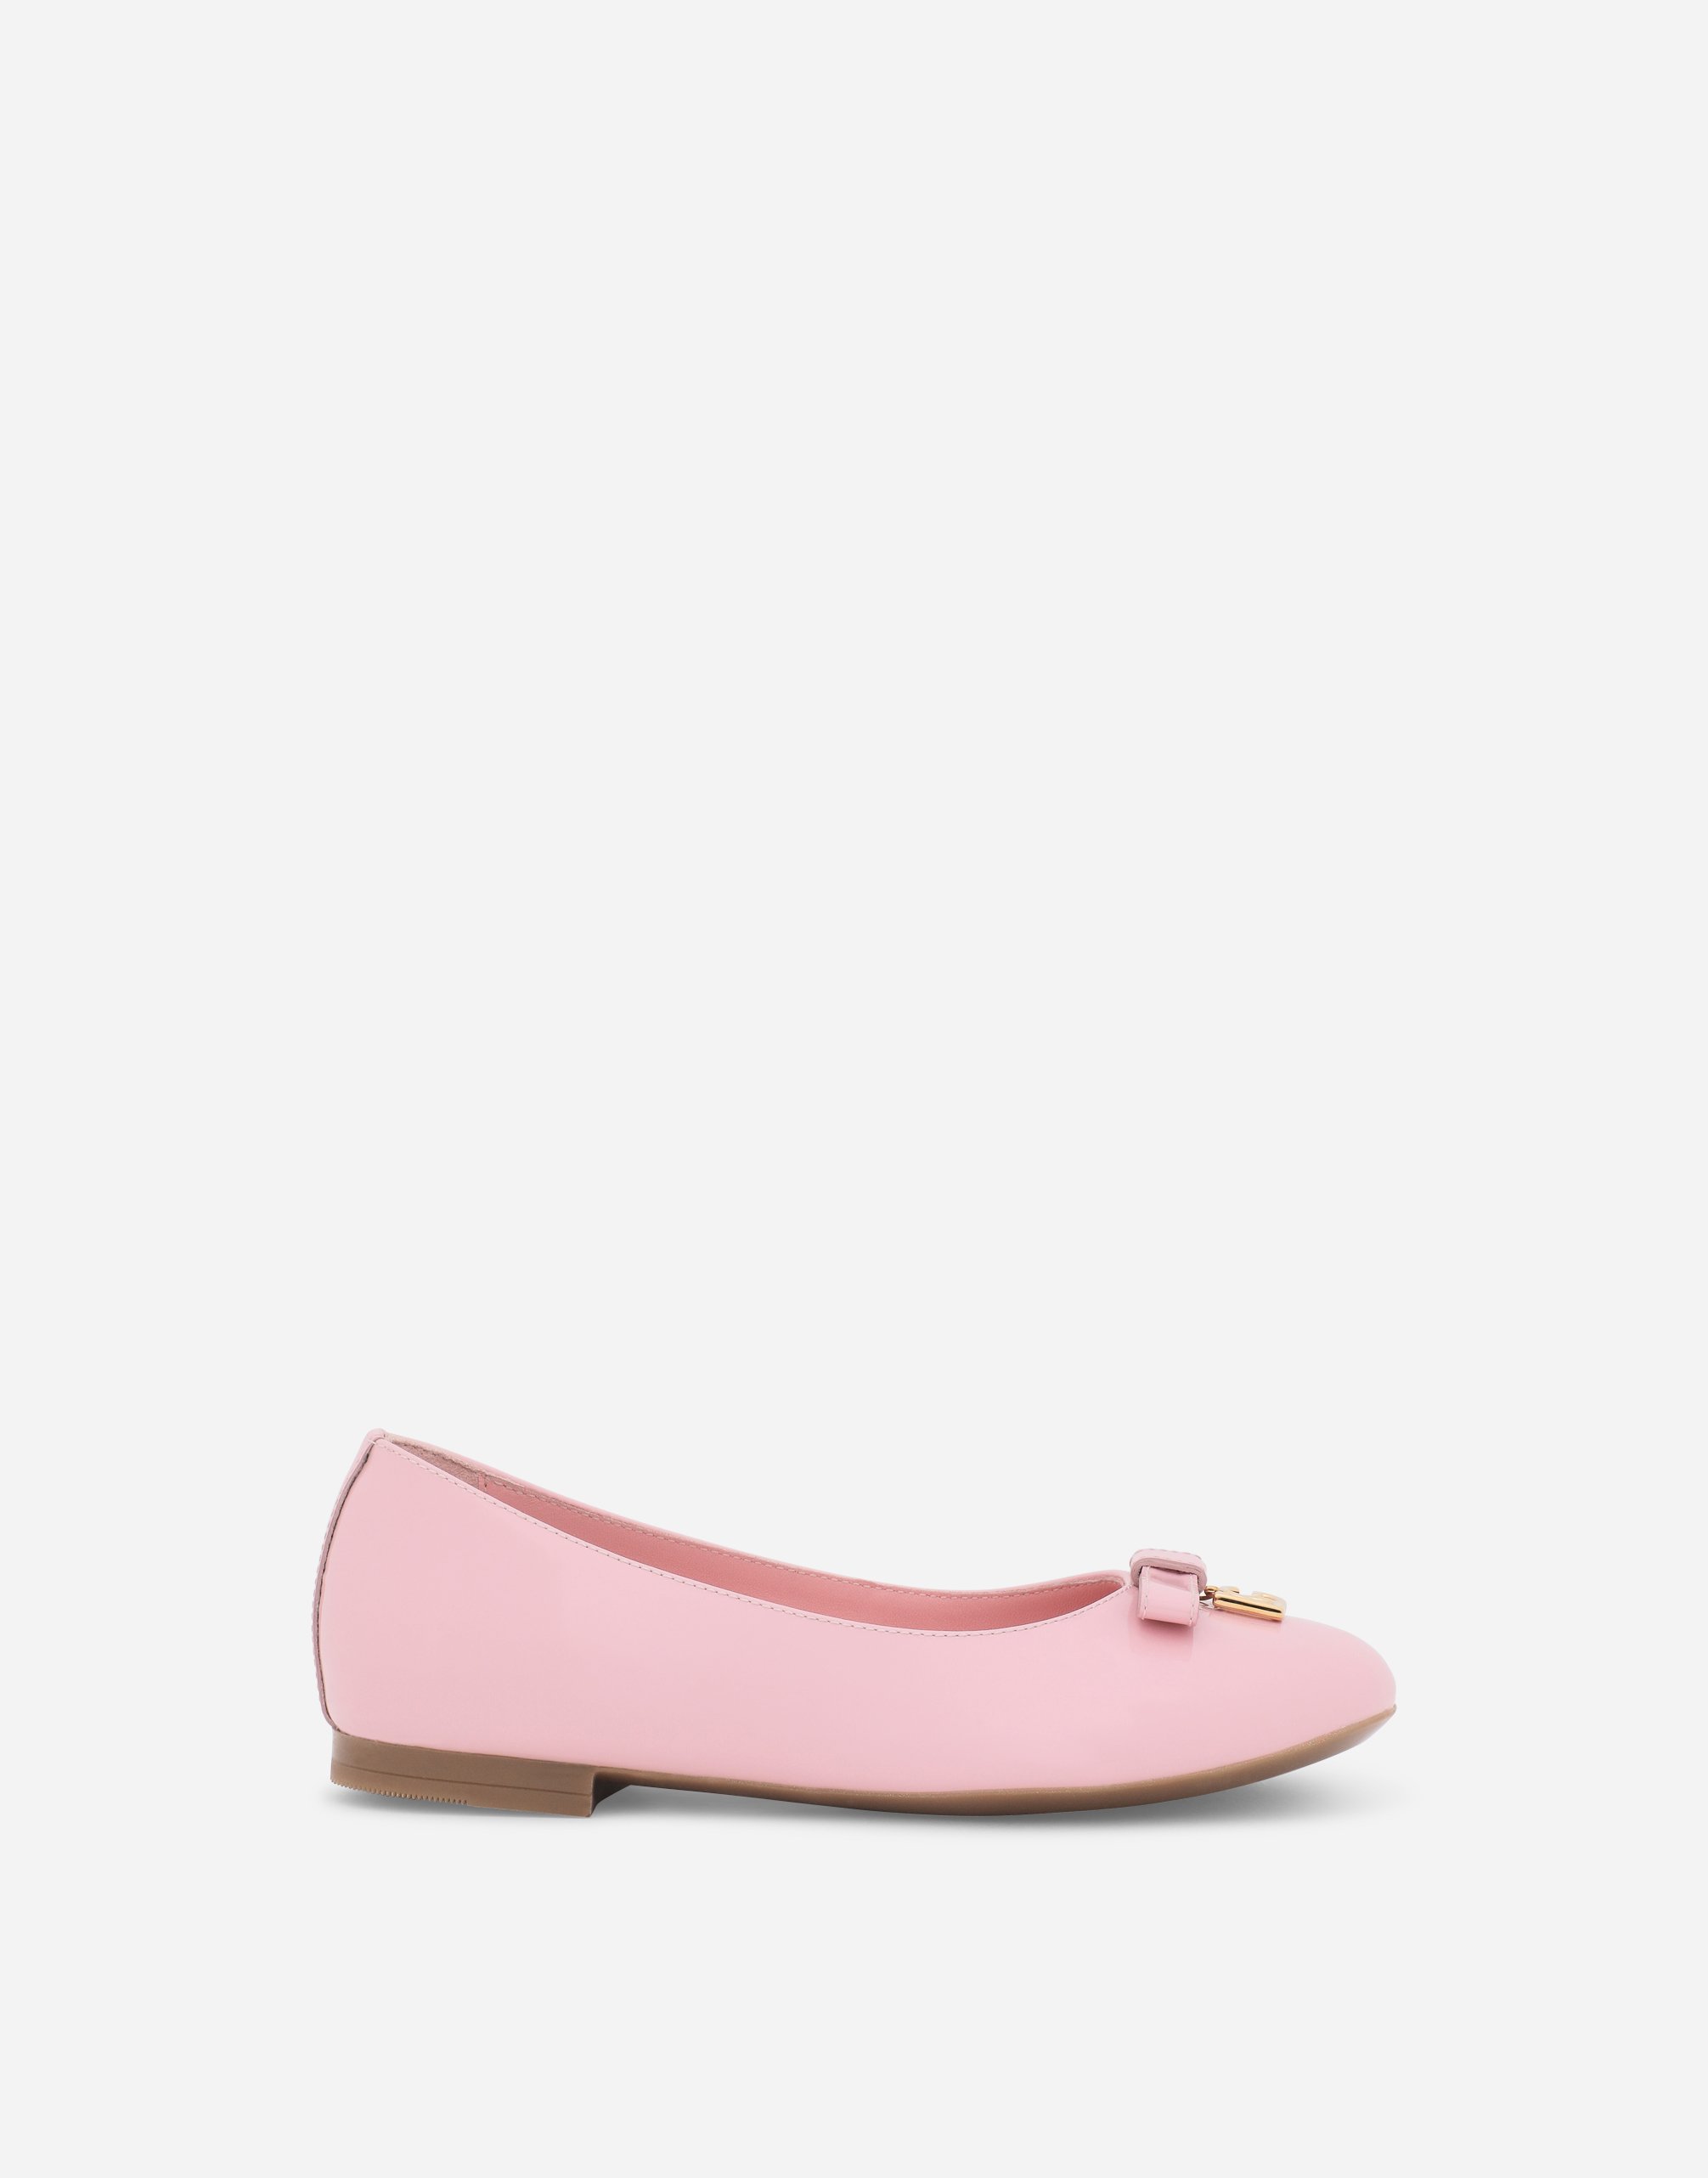 Dolce & Gabbana Kids' Patent Leather Ballet Flats With Metal Dg Logo In Pink